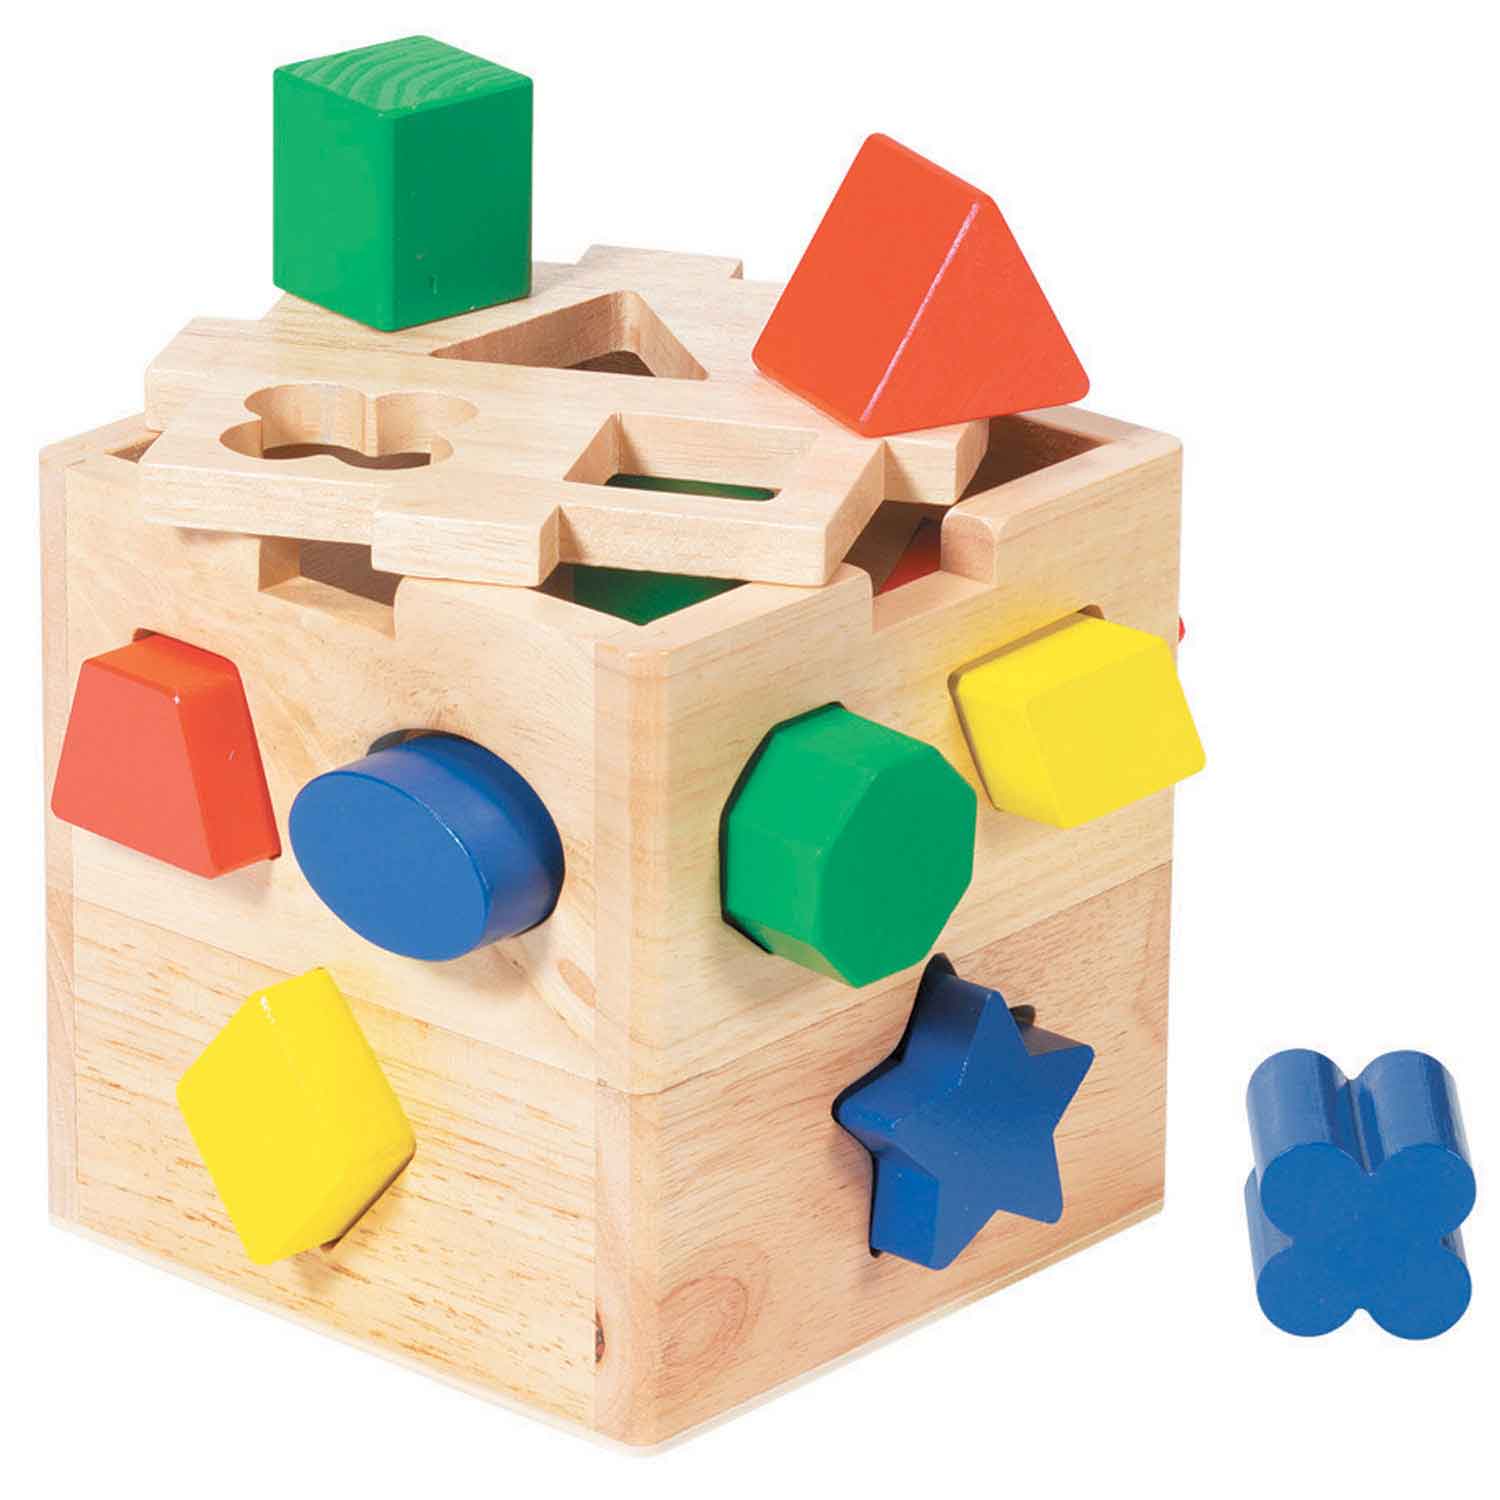  Melissa & Doug Shape Sorting Cube - Classic Wooden Toy With 12  Shapes - Kids Shape Sorter Toys For Toddlers Ages 2+ : Melissa & Doug: Toys  & Games